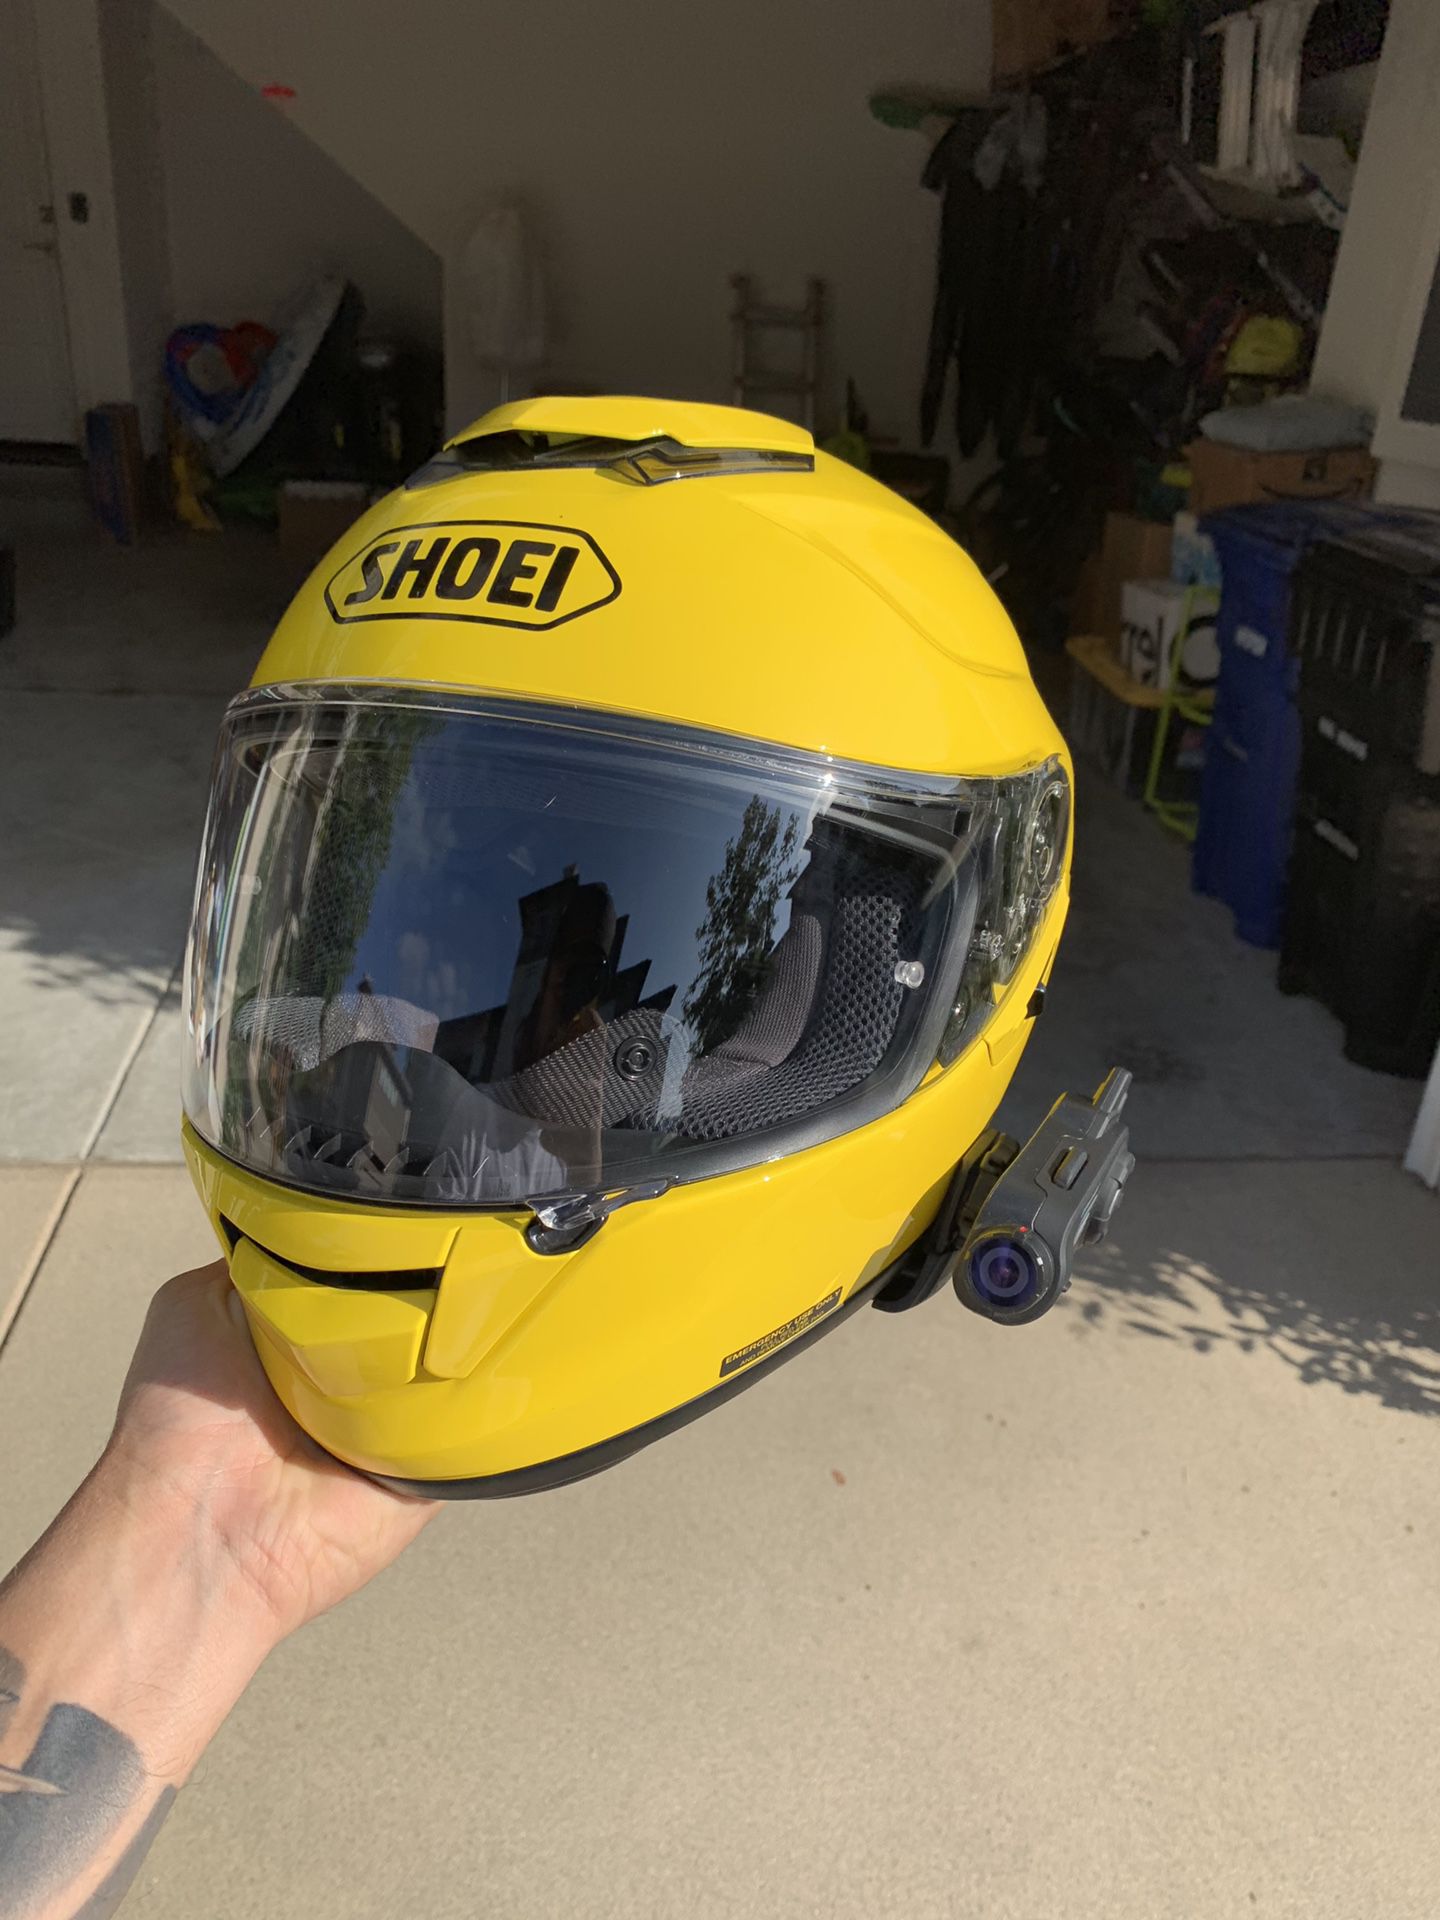 Selling Shoei helmet in size M in great condition. Barely used